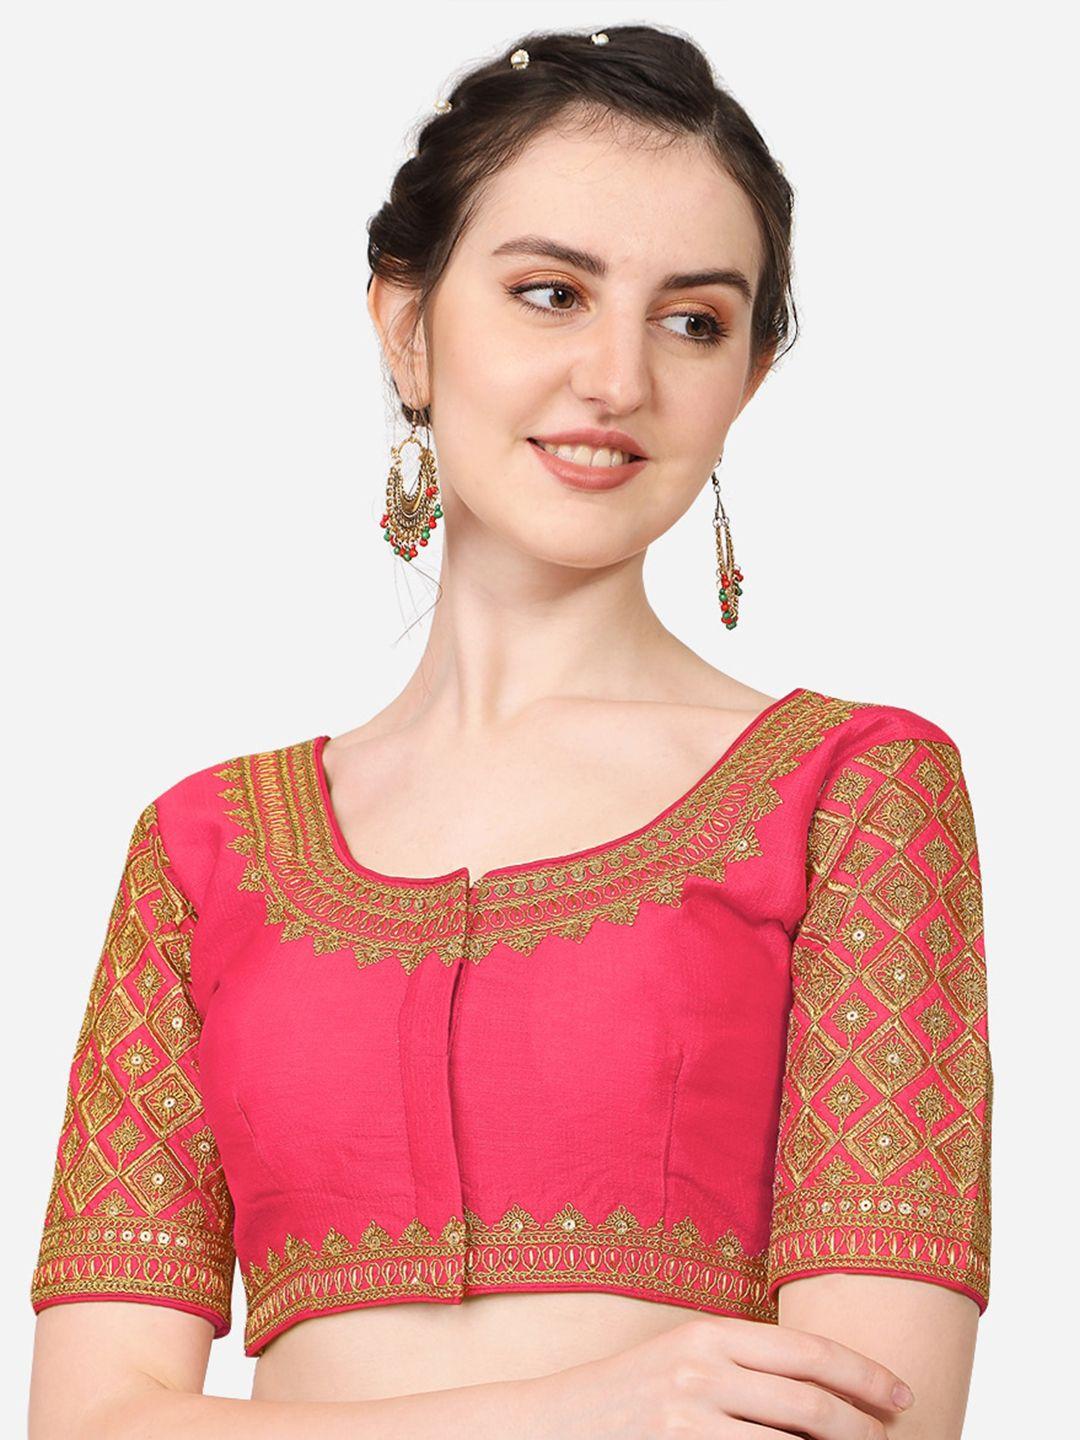 pujia mills pink & gold-coloured embroidered saree blouse